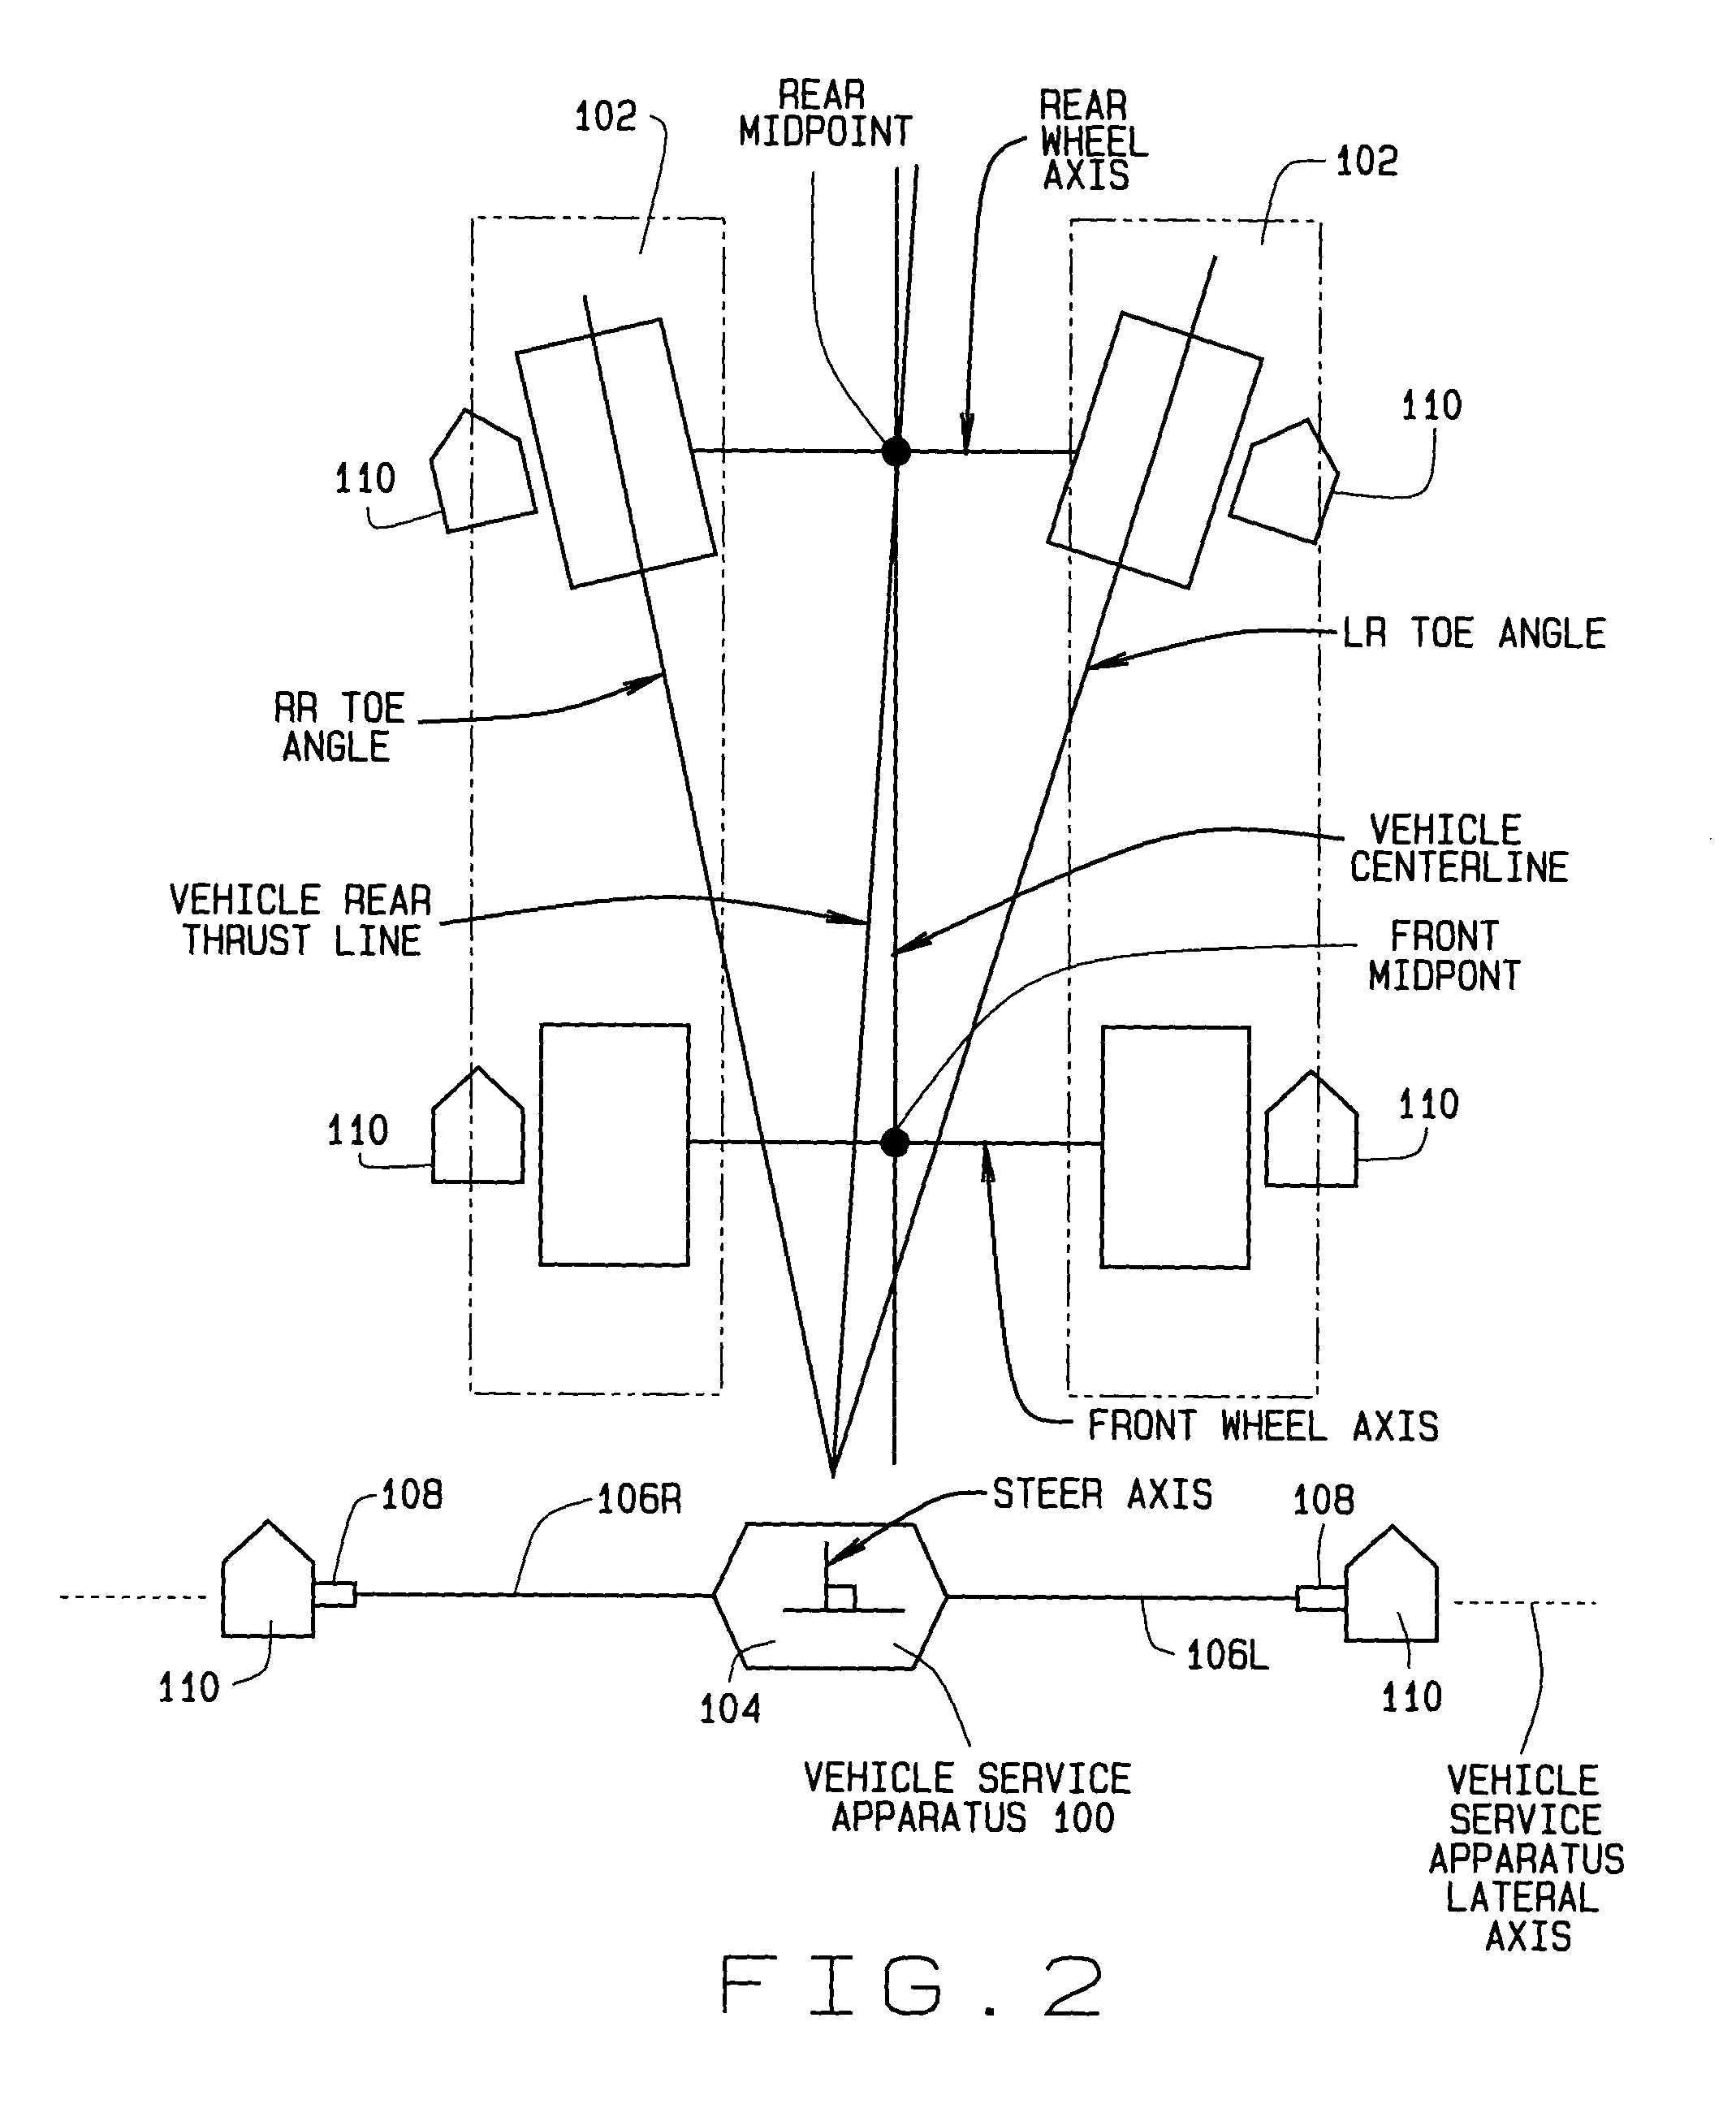 Method and apparatus for guiding placement of vehicle service fixtures